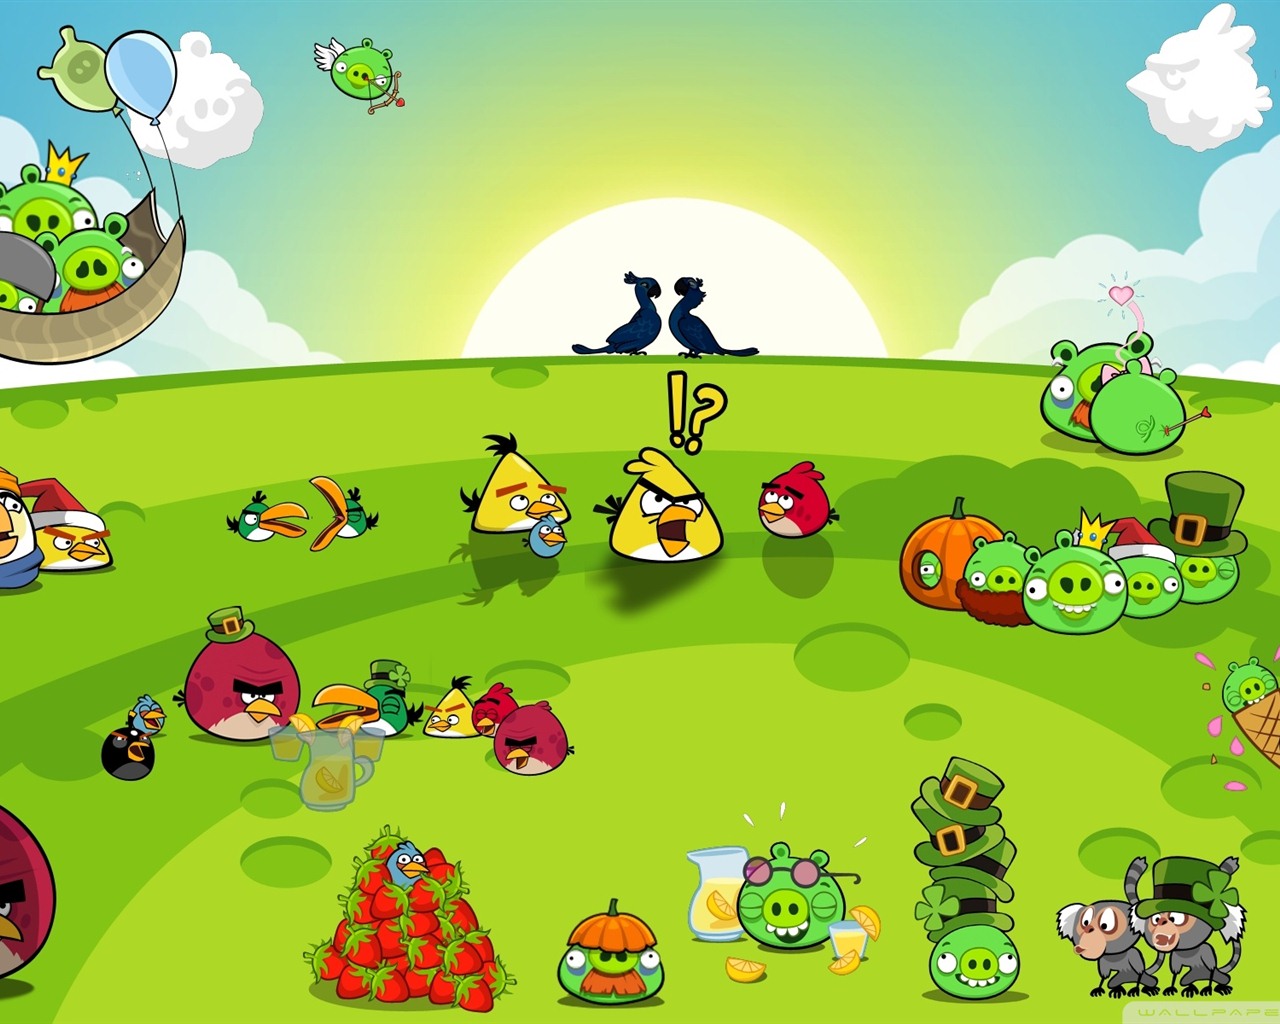 Angry Birds Game Wallpapers #11 - 1280x1024